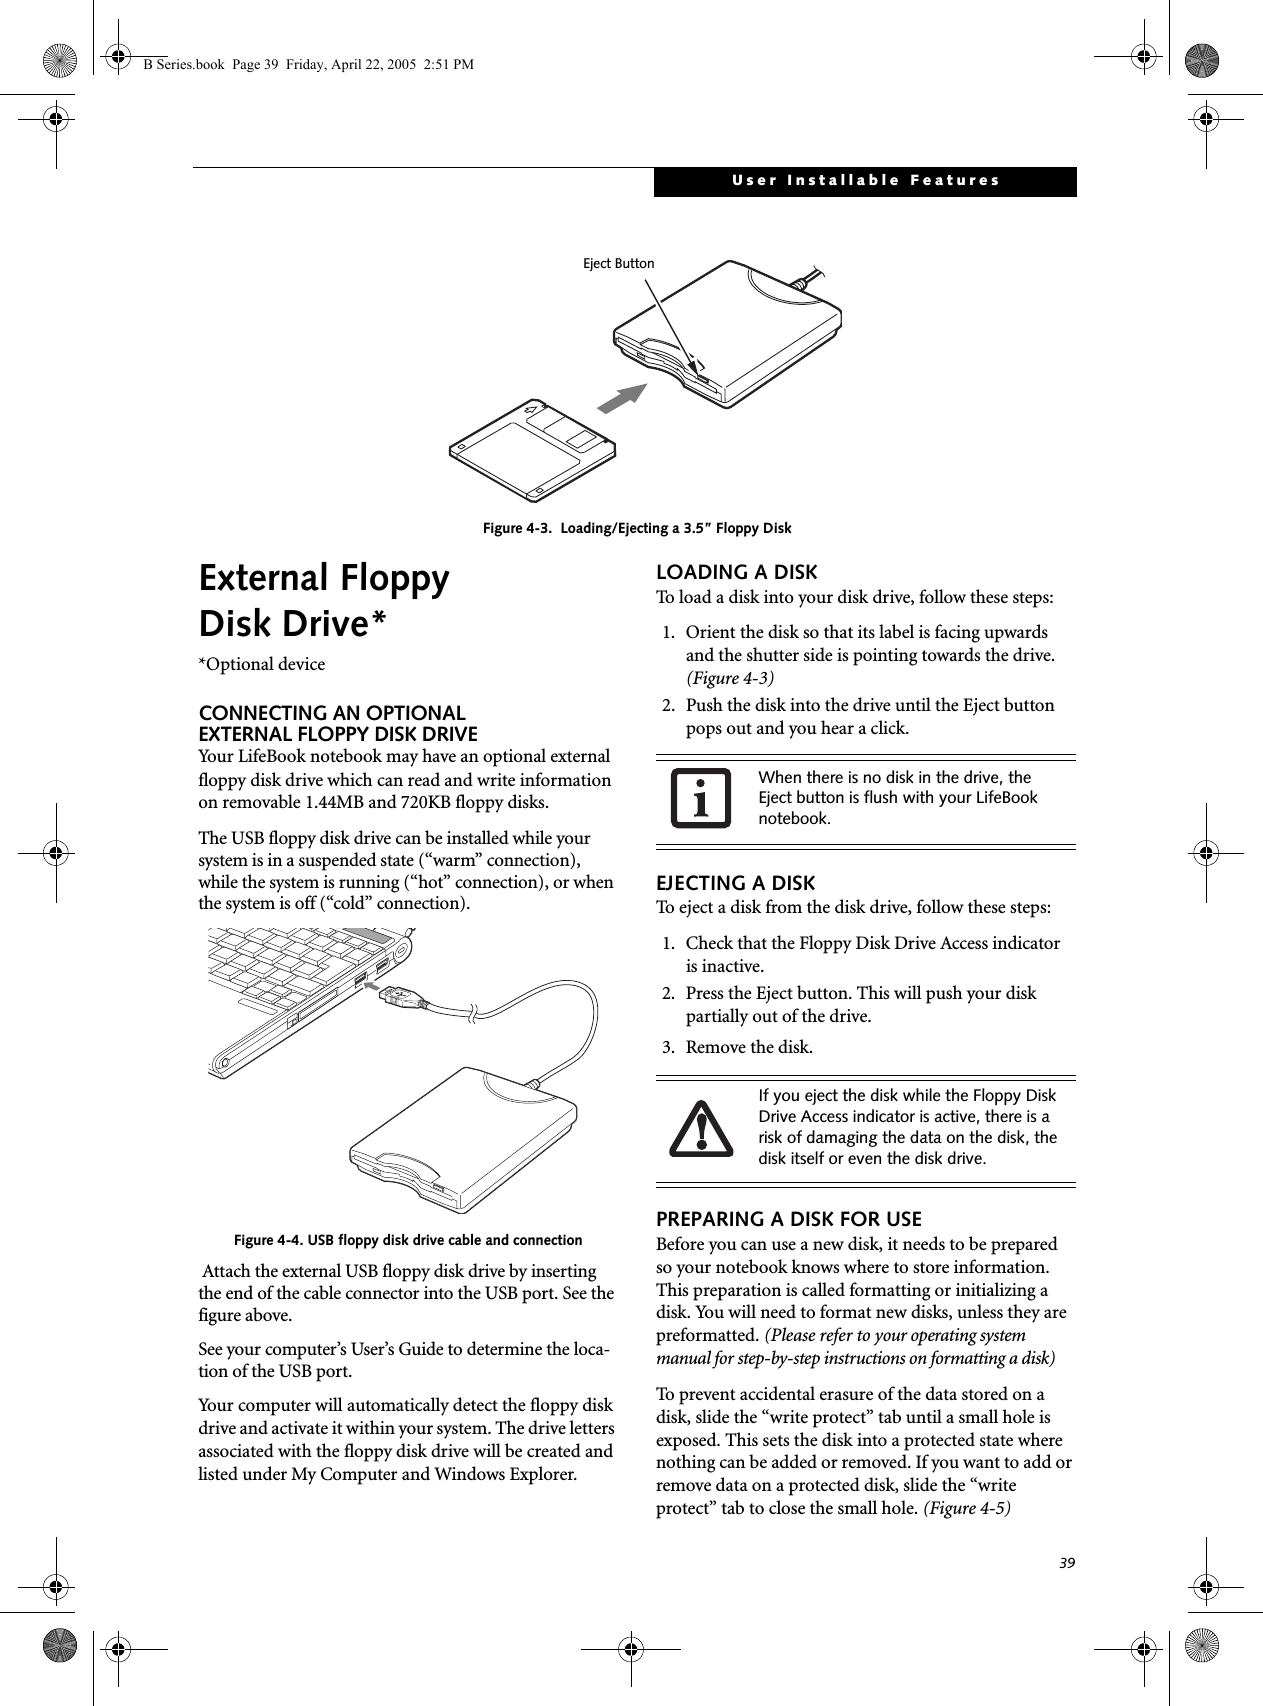 39User Installable FeaturesFigure 4-3.  Loading/Ejecting a 3.5” Floppy DiskExternal Floppy Disk Drive**Optional deviceCONNECTING AN OPTIONALEXTERNAL FLOPPY DISK DRIVEYour LifeBook notebook may have an optional external floppy disk drive which can read and write information on removable 1.44MB and 720KB floppy disks.The USB floppy disk drive can be installed while your system is in a suspended state (“warm” connection), while the system is running (“hot” connection), or when the system is off (“cold” connection).Figure 4-4. USB floppy disk drive cable and connection Attach the external USB floppy disk drive by inserting the end of the cable connector into the USB port. See the figure above.See your computer’s User’s Guide to determine the loca-tion of the USB port.Your computer will automatically detect the floppy disk drive and activate it within your system. The drive letters associated with the floppy disk drive will be created and listed under My Computer and Windows Explorer.LOADING A DISKTo load a disk into your disk drive, follow these steps: 1. Orient the disk so that its label is facing upwardsand the shutter side is pointing towards the drive. (Figure 4-3)2. Push the disk into the drive until the Eject button pops out and you hear a click. EJECTING A DISKTo eject a disk from the disk drive, follow these steps:1. Check that the Floppy Disk Drive Access indicatoris inactive.2. Press the Eject button. This will push your disk partially out of the drive.3. Remove the disk.PREPARING A DISK FOR USEBefore you can use a new disk, it needs to be preparedso your notebook knows where to store information. This preparation is called formatting or initializing a disk. You will need to format new disks, unless they are preformatted. (Please refer to your operating system manual for step-by-step instructions on formatting a disk) To prevent accidental erasure of the data stored on a disk, slide the “write protect” tab until a small hole is exposed. This sets the disk into a protected state where nothing can be added or removed. If you want to add or remove data on a protected disk, slide the “write protect” tab to close the small hole. (Figure 4-5)Eject ButtonWhen there is no disk in the drive, the Eject button is flush with your LifeBook notebook.If you eject the disk while the Floppy Disk Drive Access indicator is active, there is a risk of damaging the data on the disk, the disk itself or even the disk drive.B Series.book  Page 39  Friday, April 22, 2005  2:51 PM